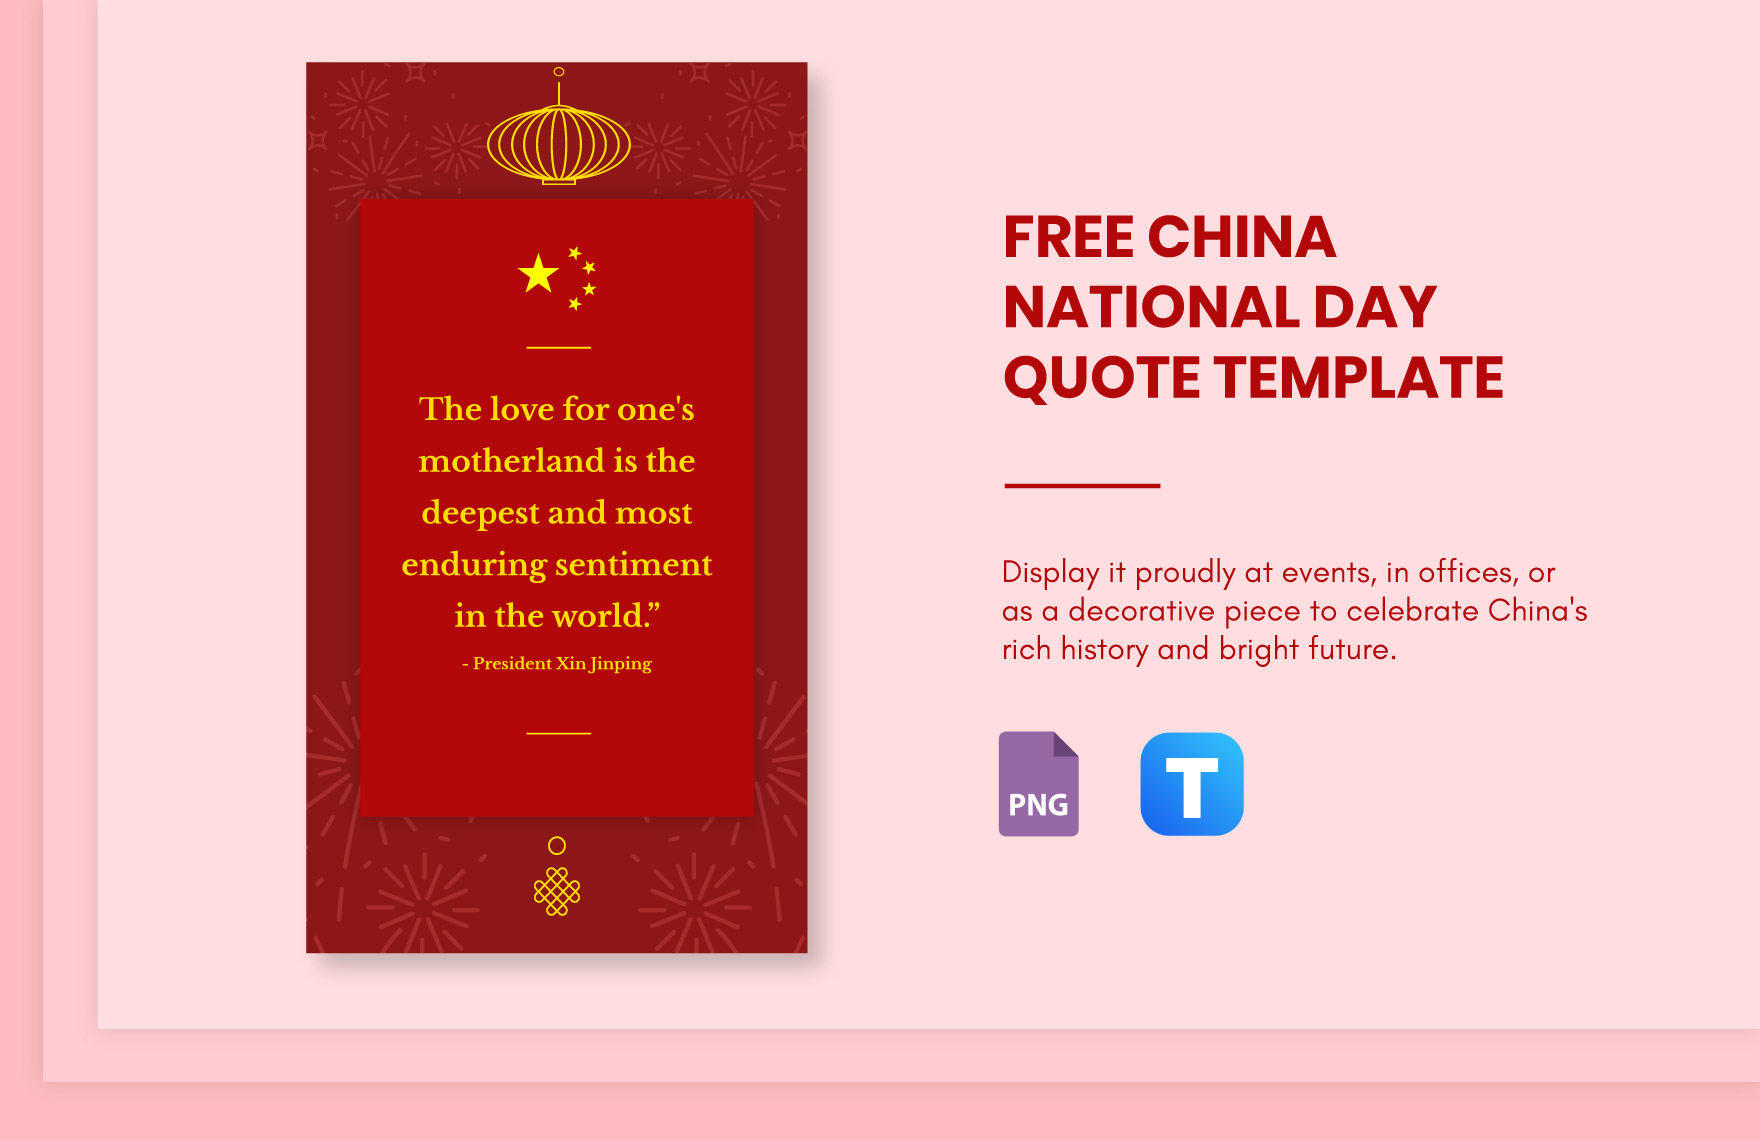 Free China National Day Quote in PNG